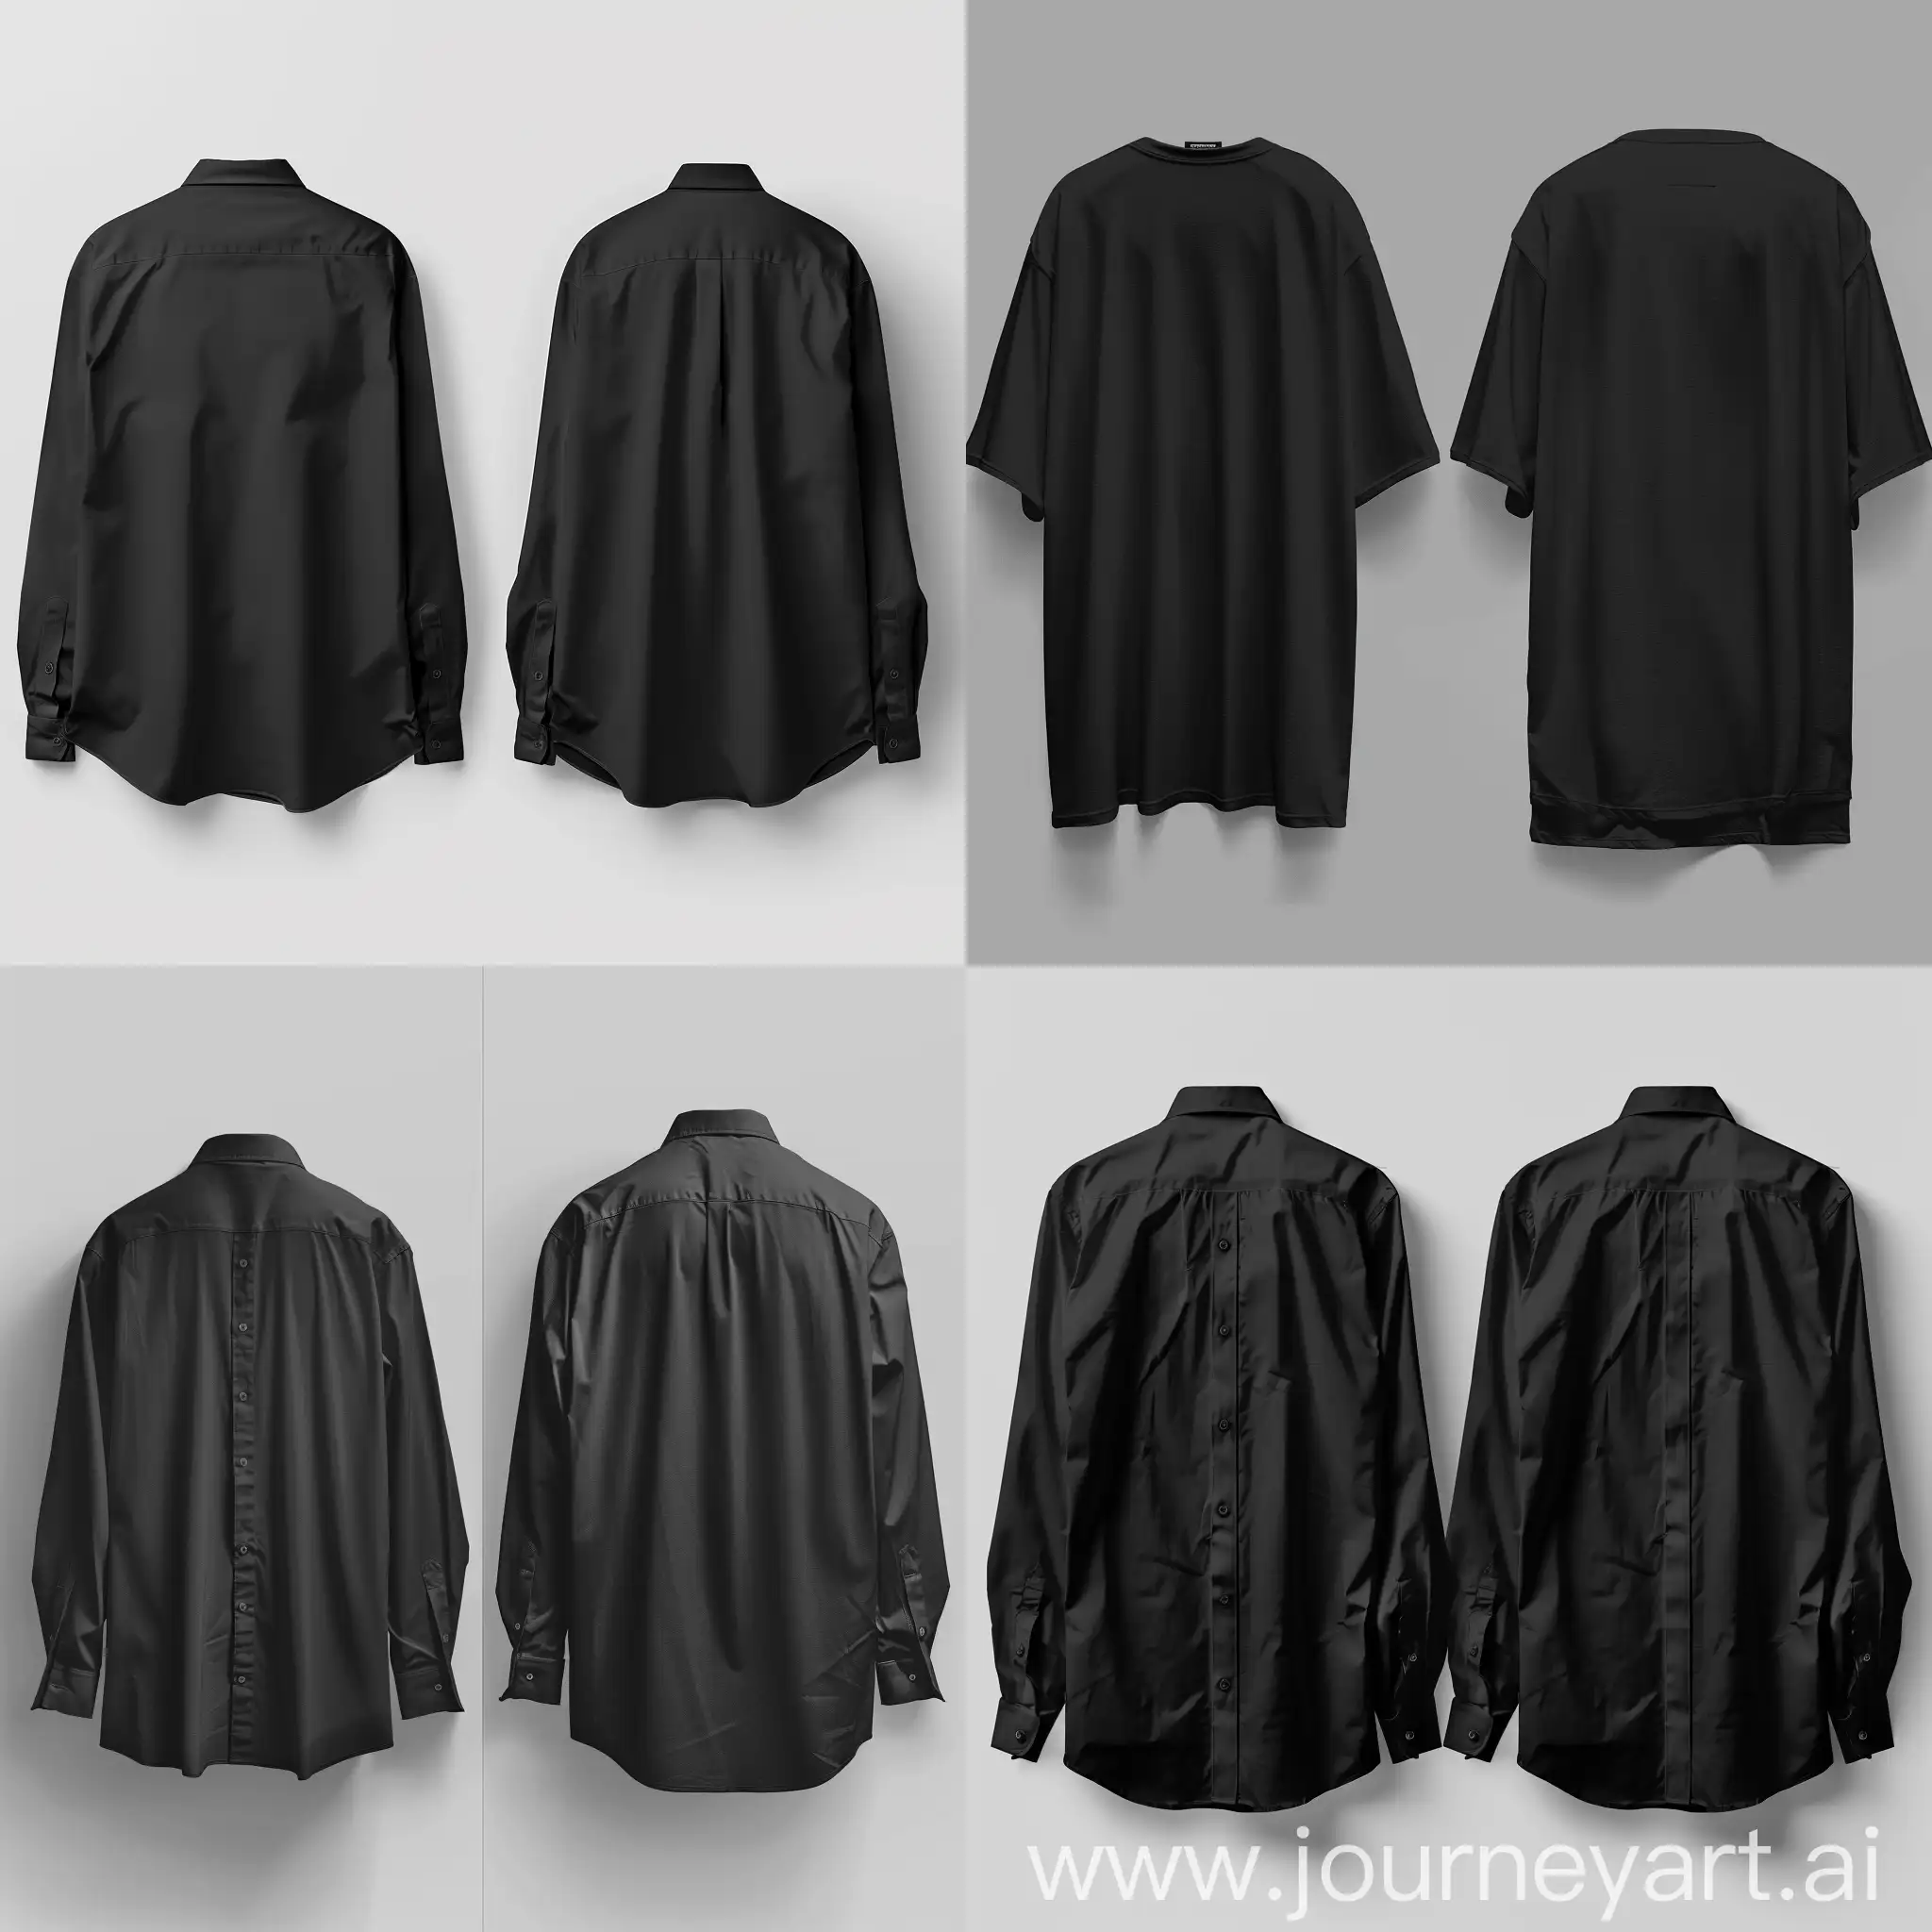 Oversize black shirt front and back template
